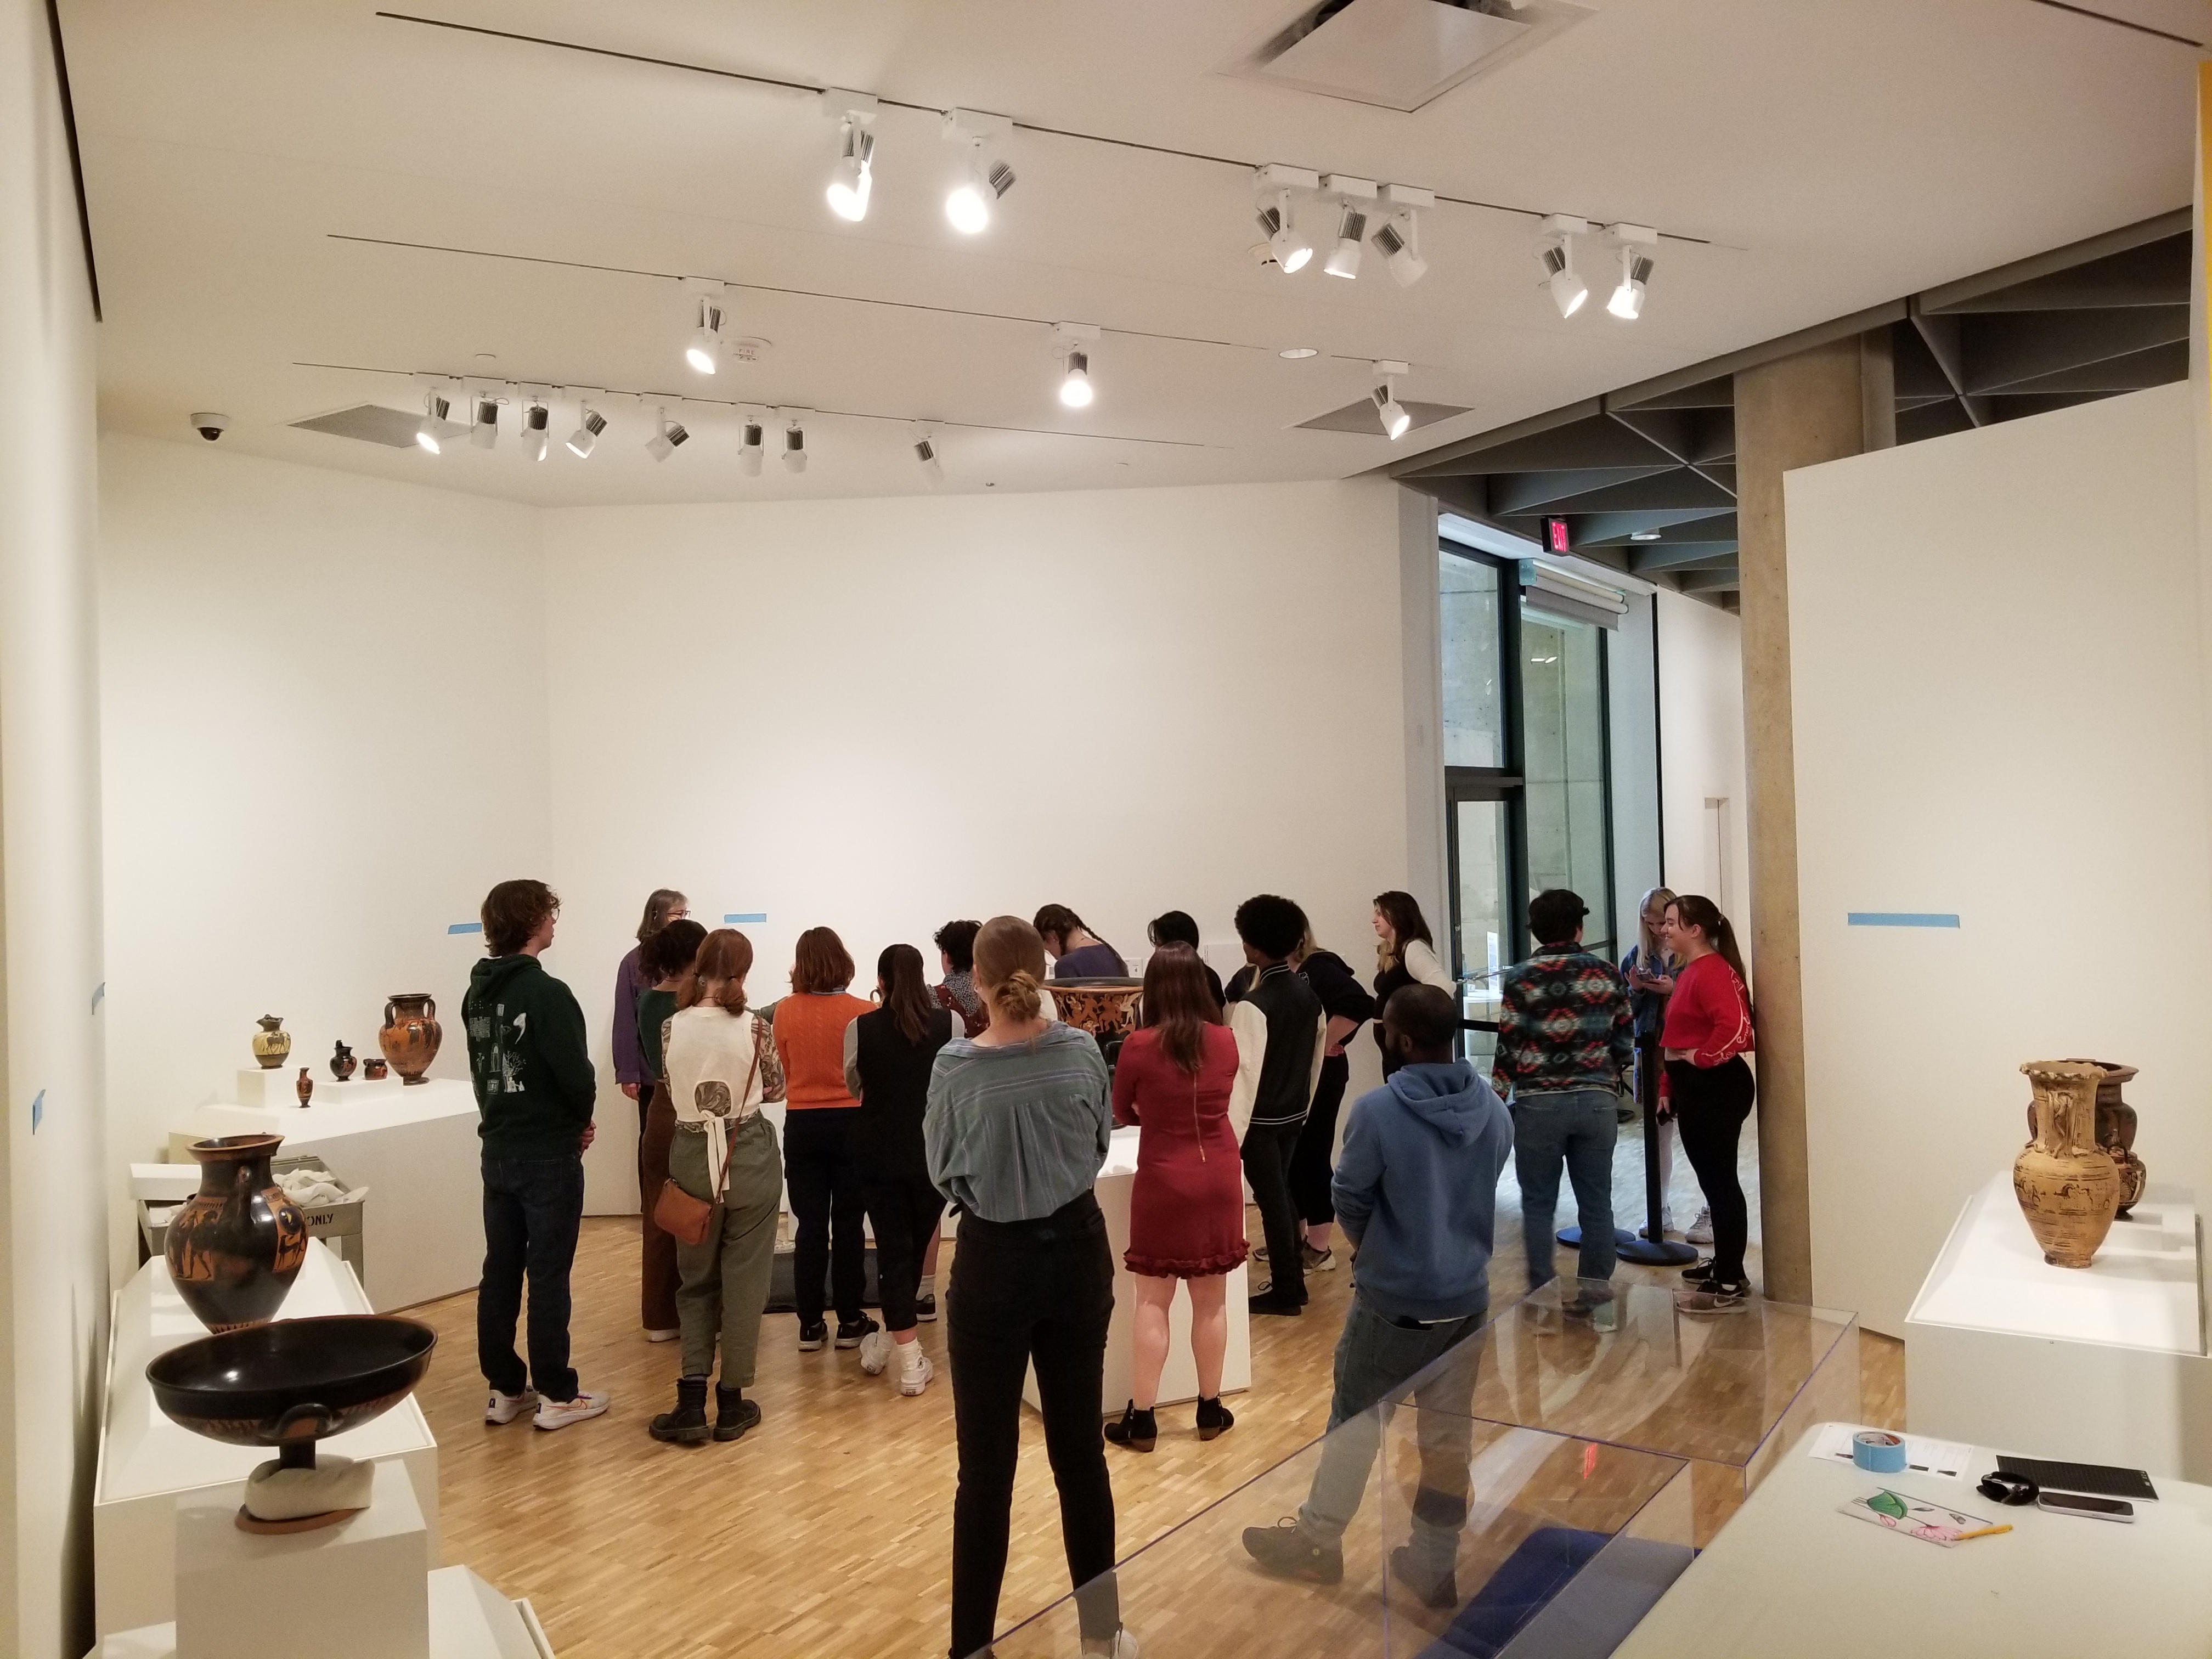 ASURE students installing the exhibition at the Eskenazi Museum of Art